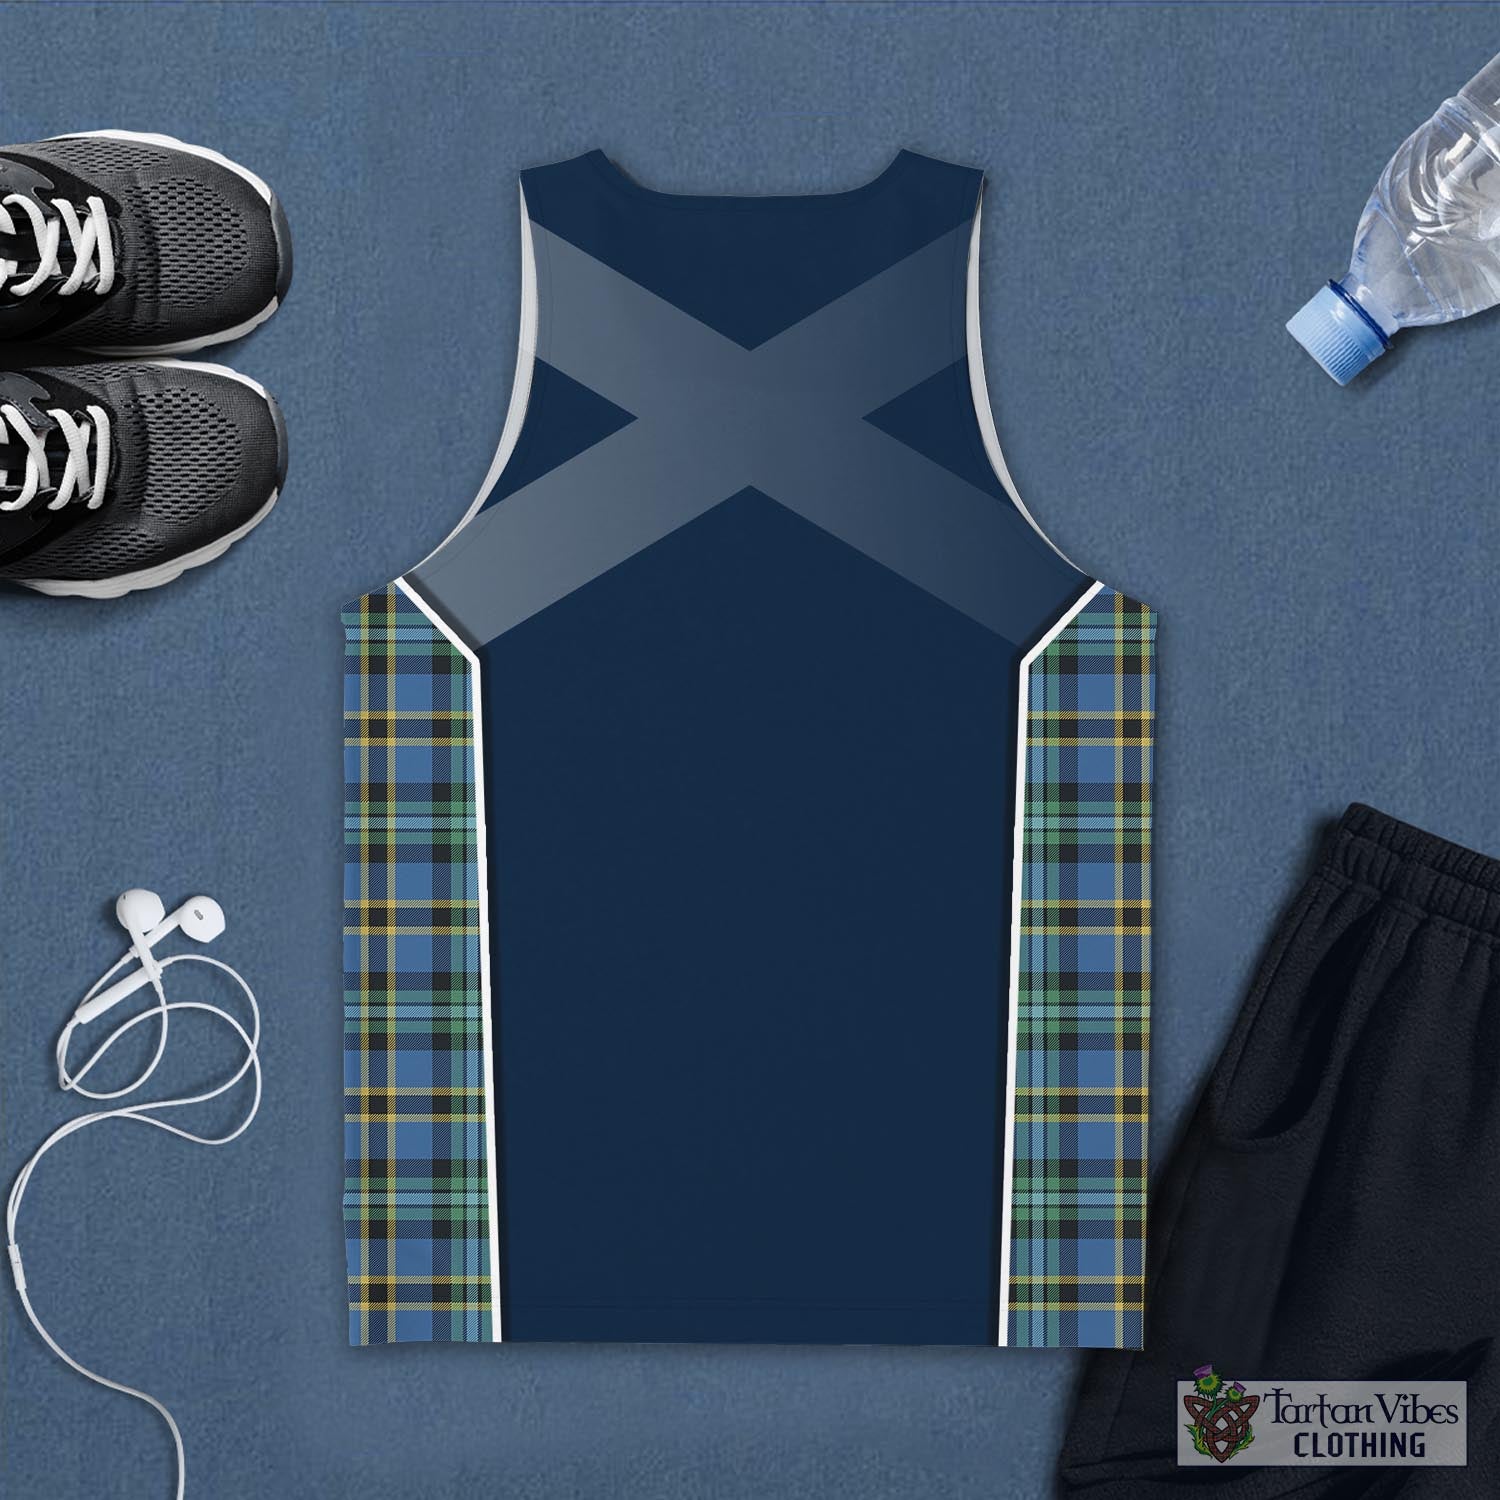 Tartan Vibes Clothing Weir Ancient Tartan Men's Tanks Top with Family Crest and Scottish Thistle Vibes Sport Style